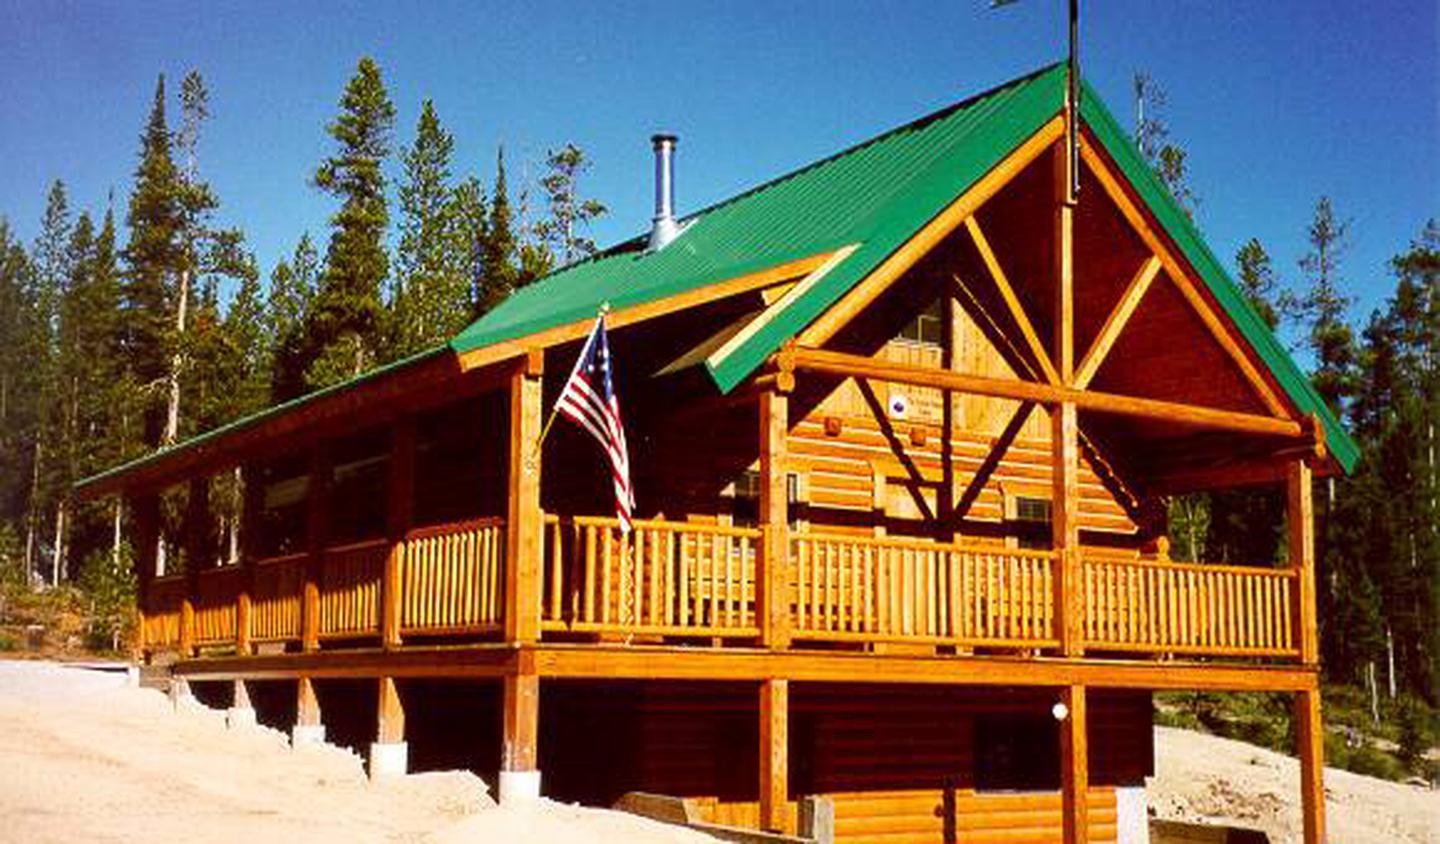 Cabin built in 2010 in the Chief Joseph XC ski trail systemGordon Reese Cabin was built in 2010